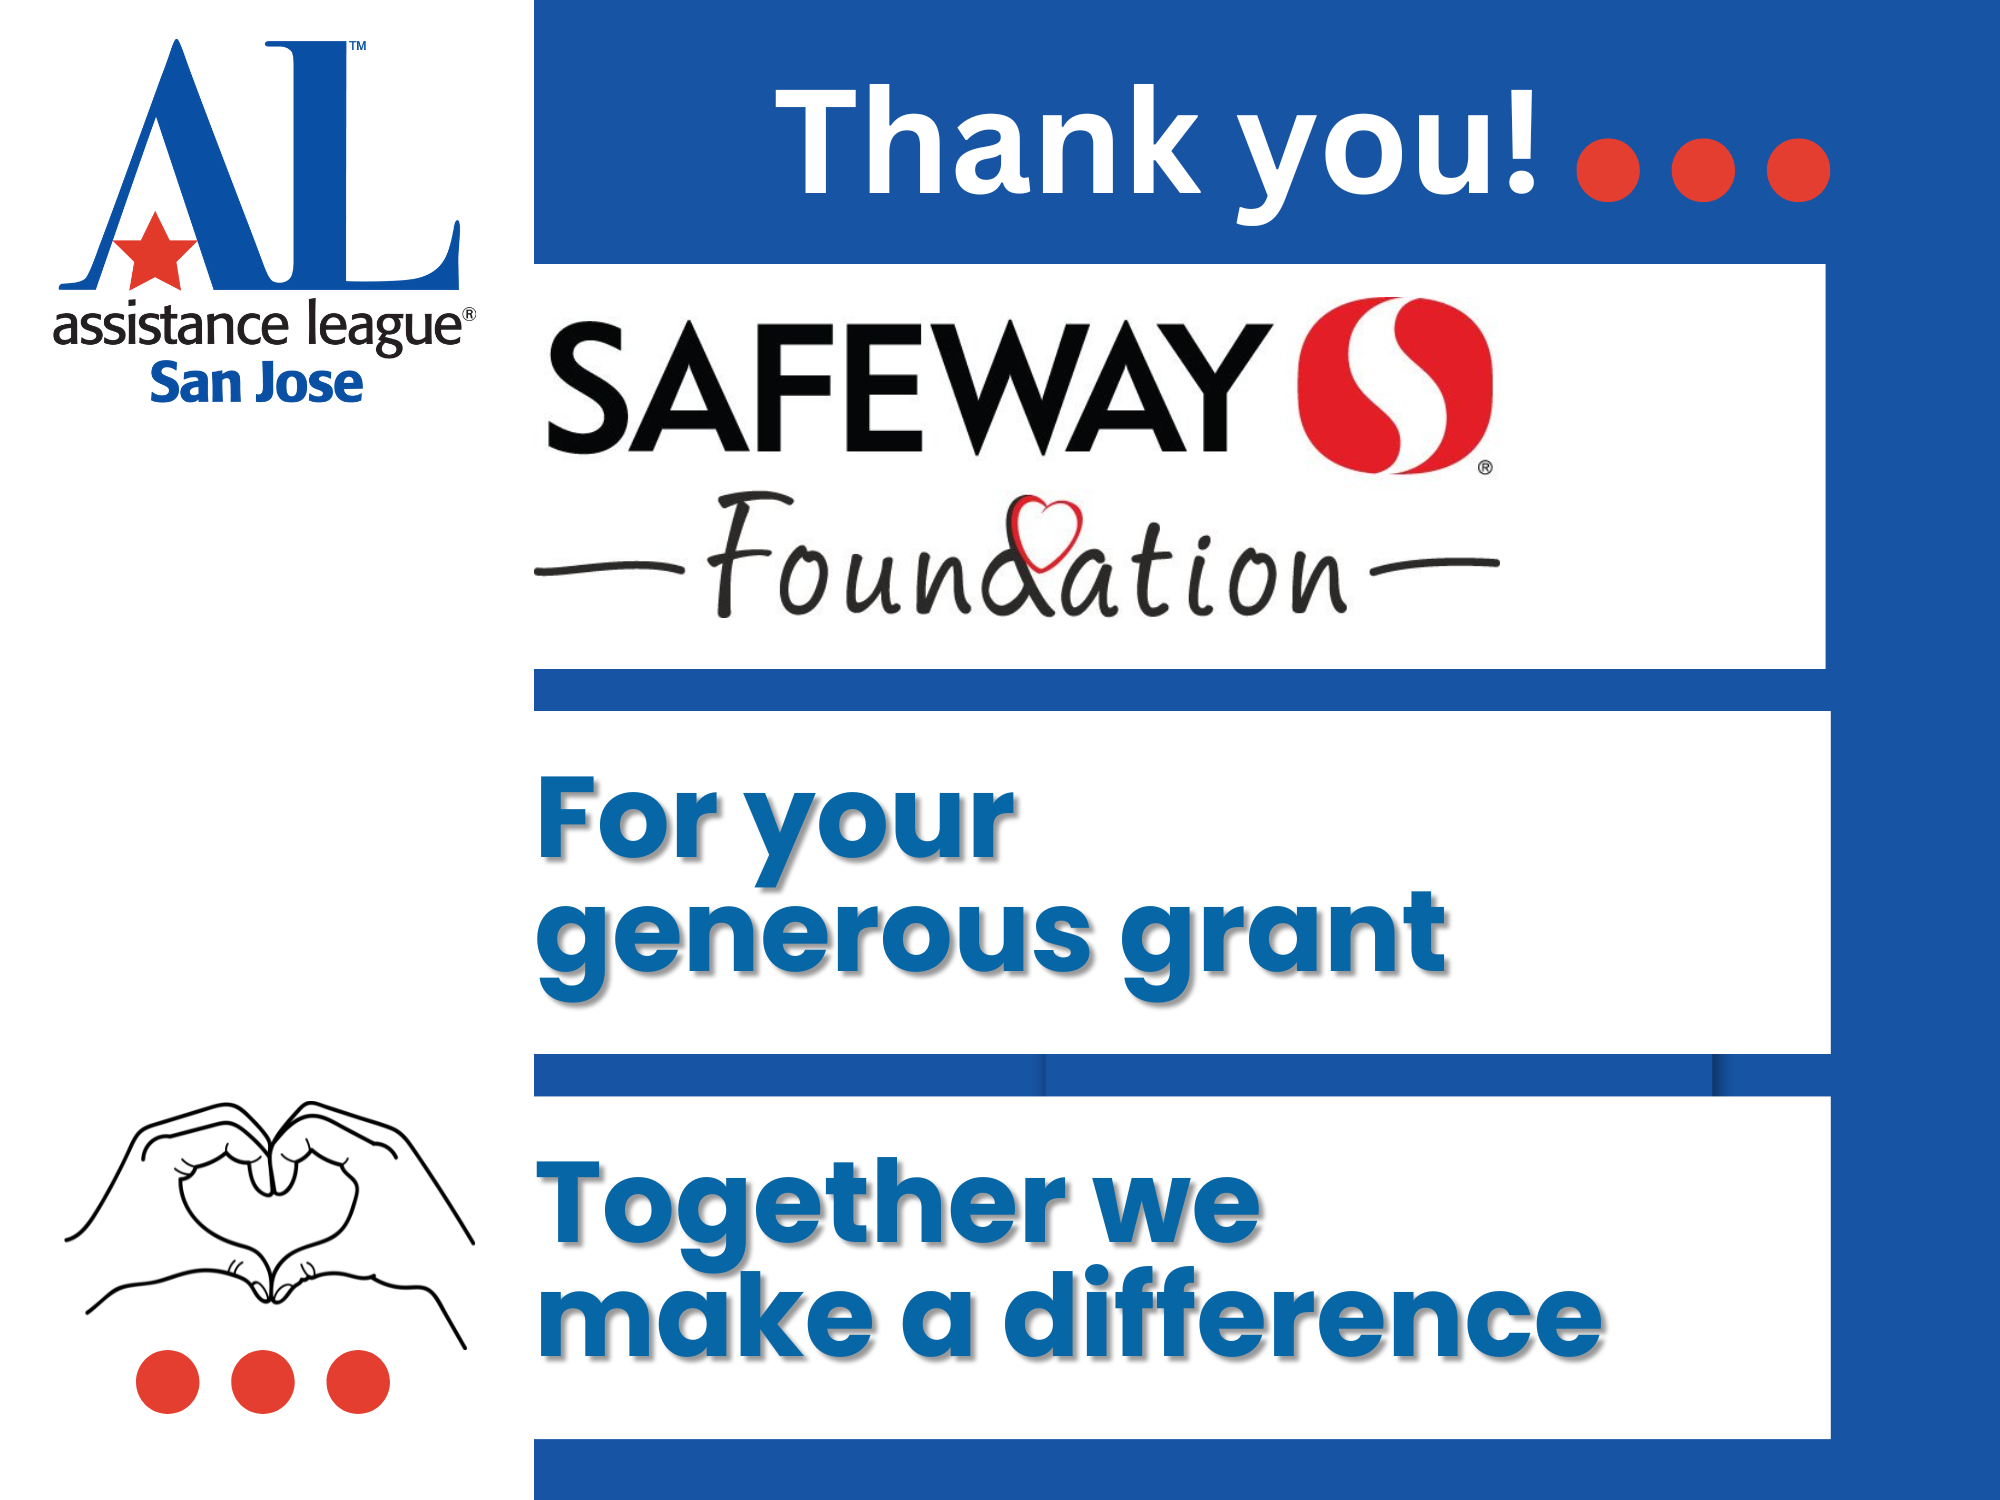 Thank You! Safeway Foundation for your generous grant. Together we make a difference.